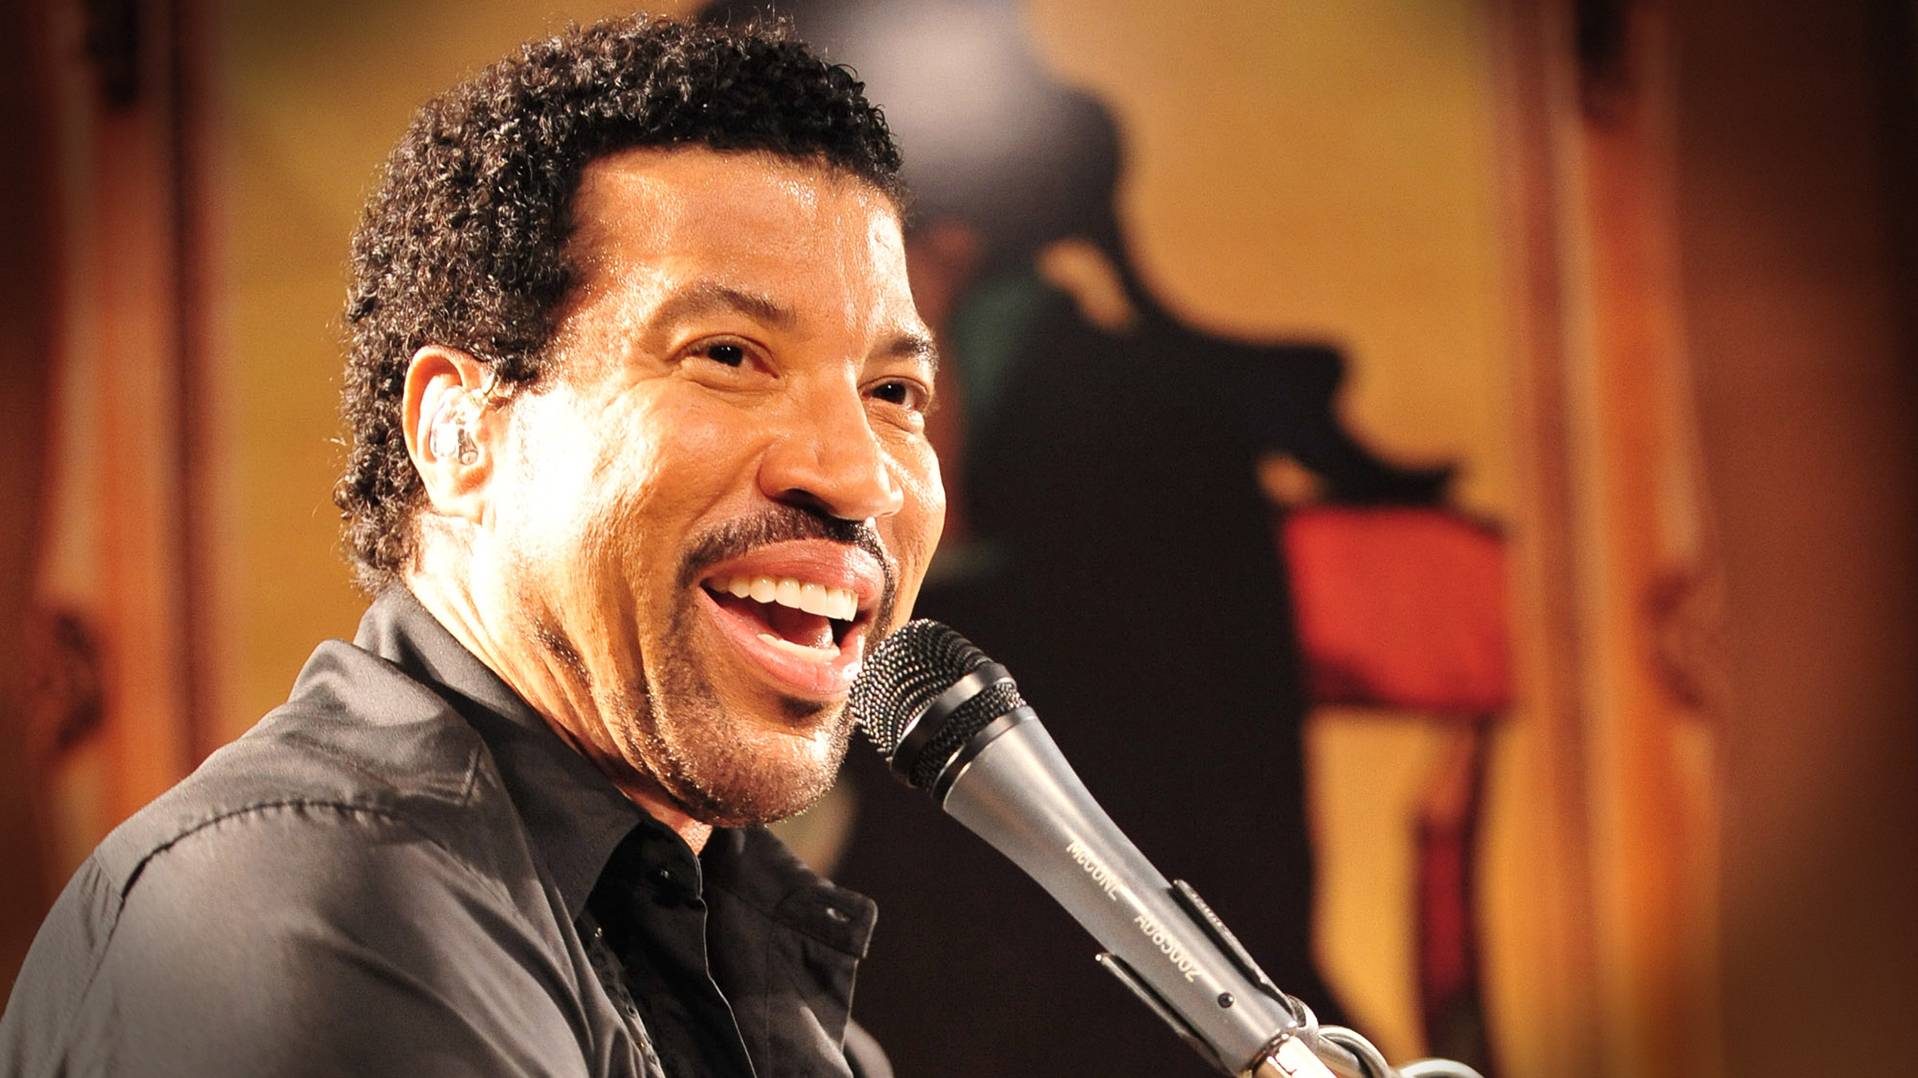 Lionel Richie, during a concert in Alabama